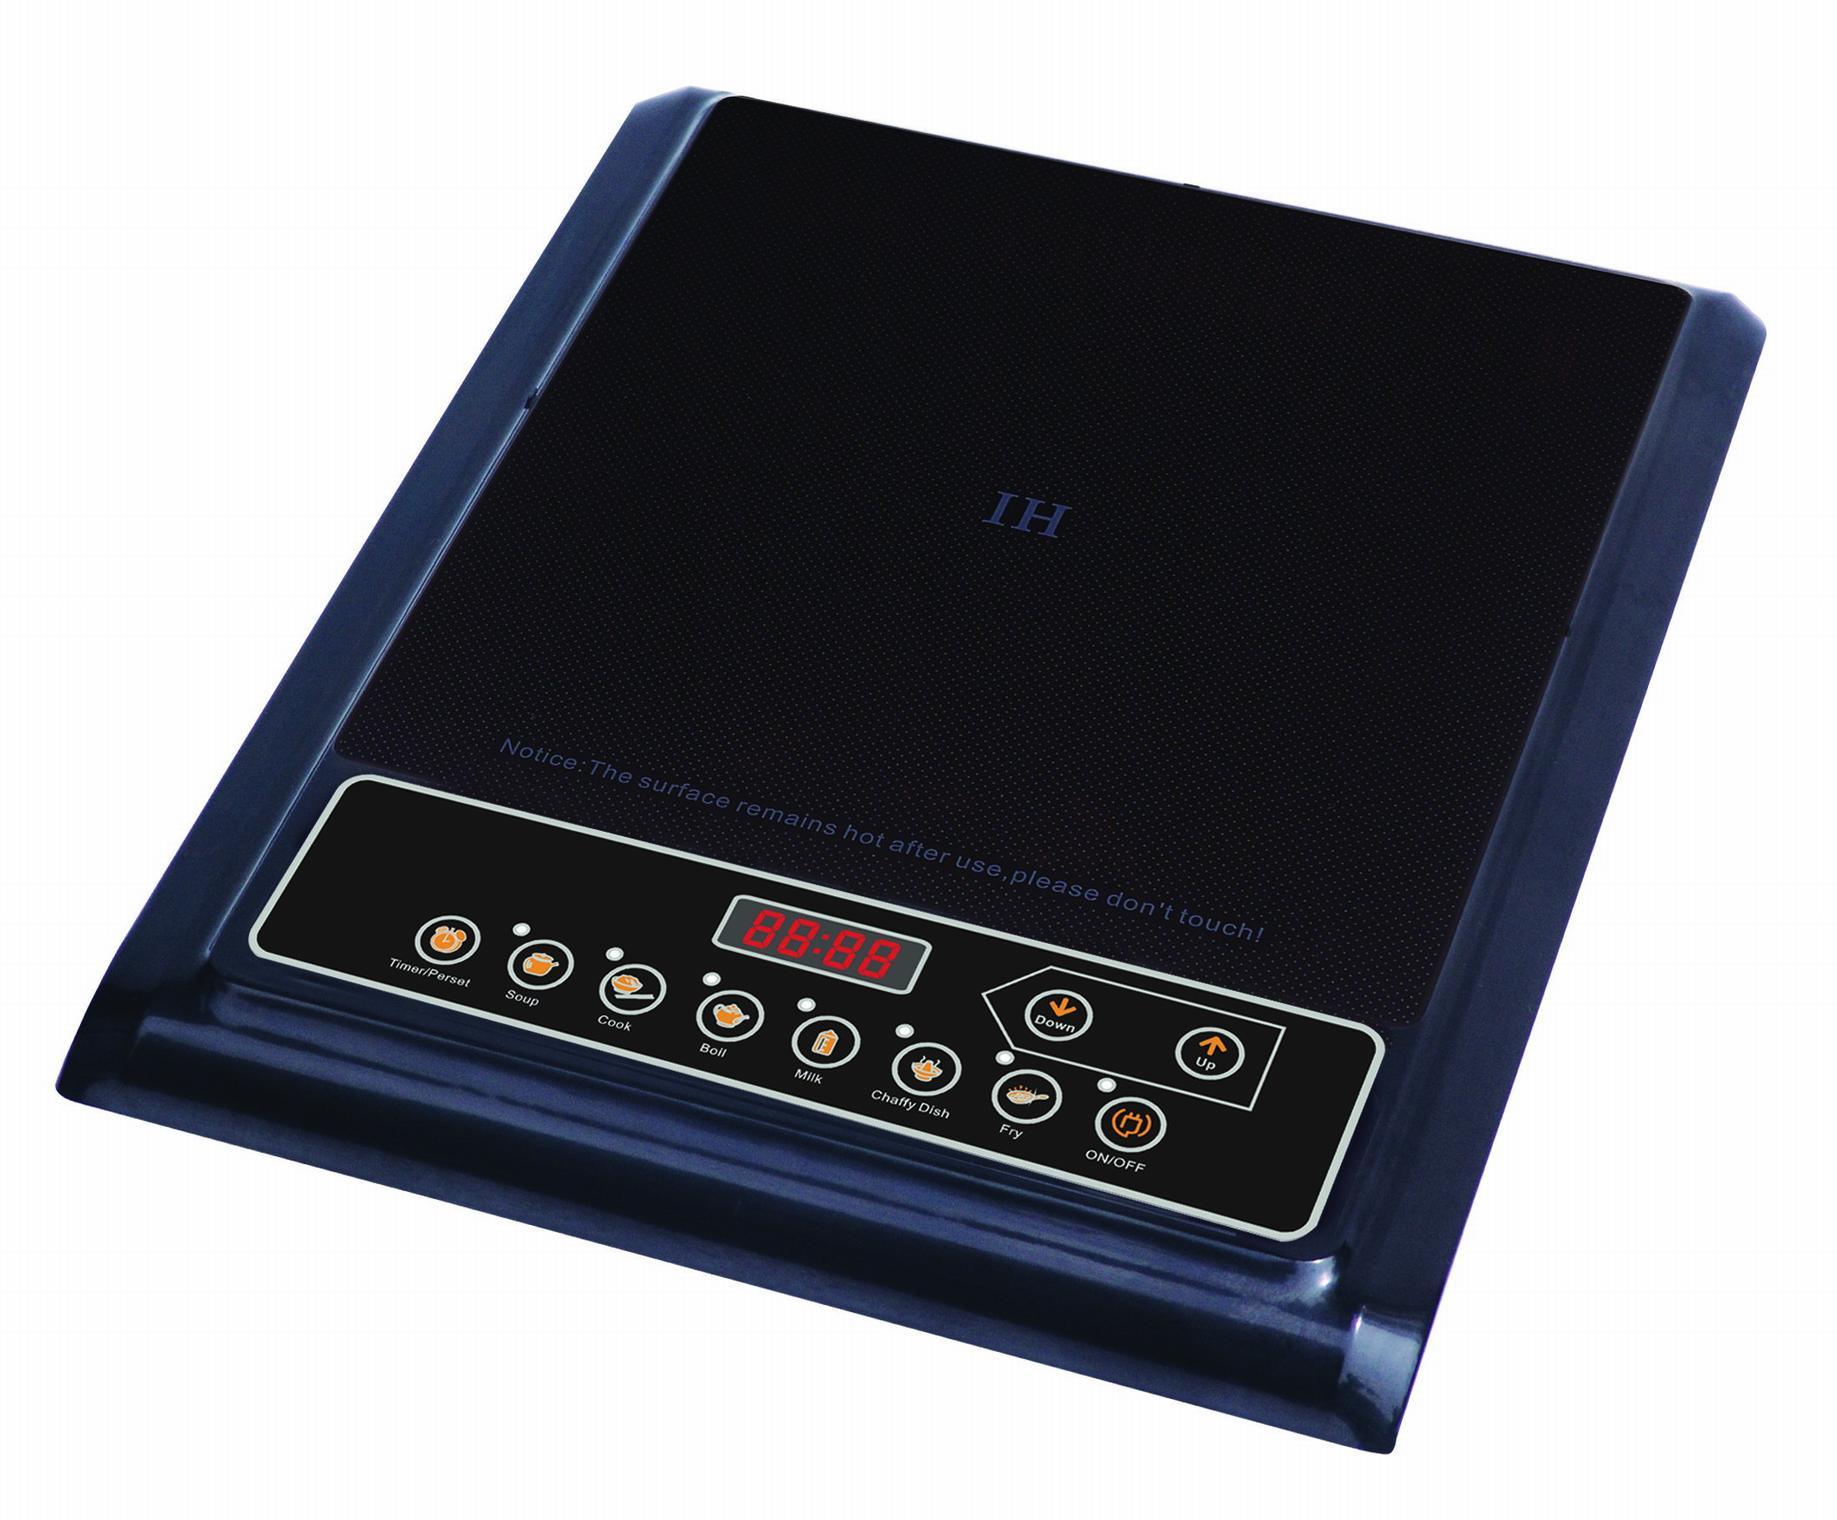 Indution Cooktop (RC-LH01-4)